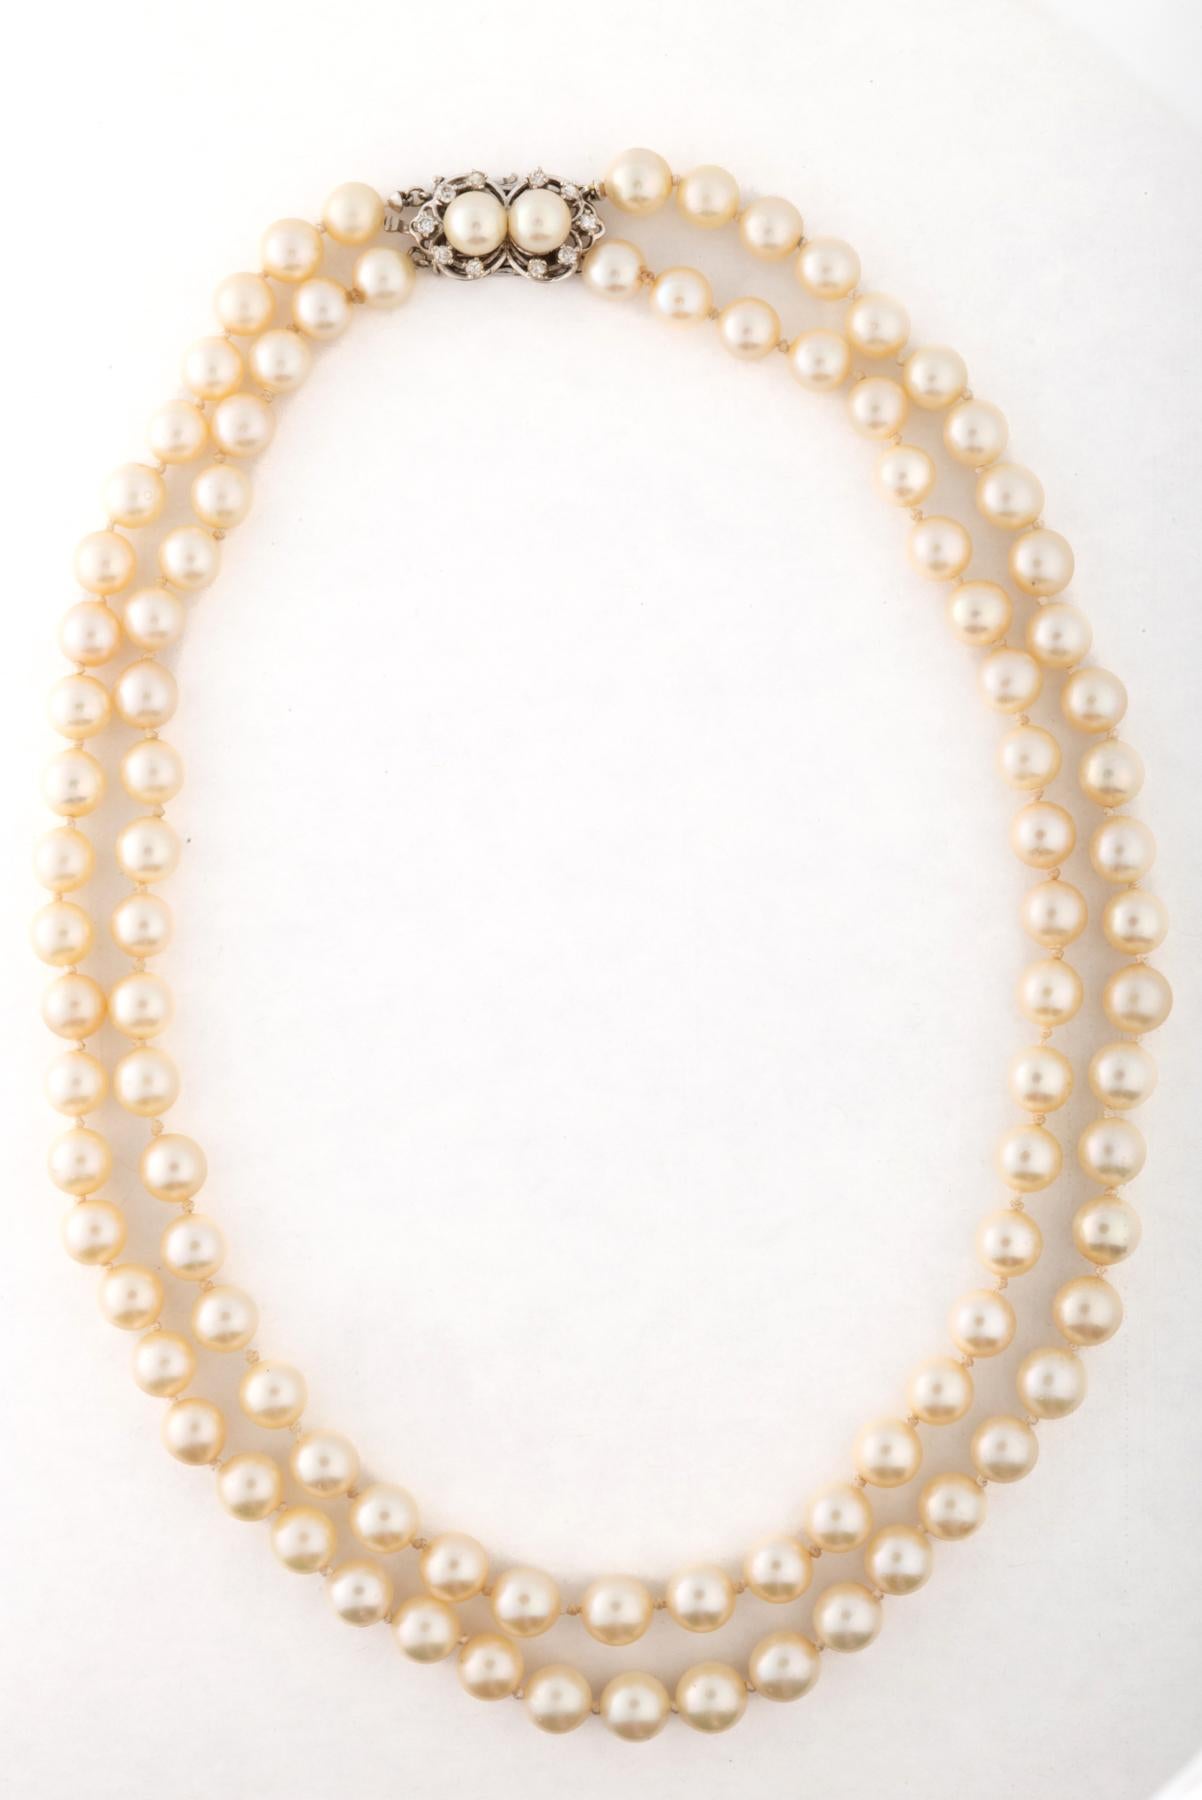 Mid Century Double Strand Cultured Pearls with Diamond Pearl Clasp In Excellent Condition For Sale In Stamford, CT